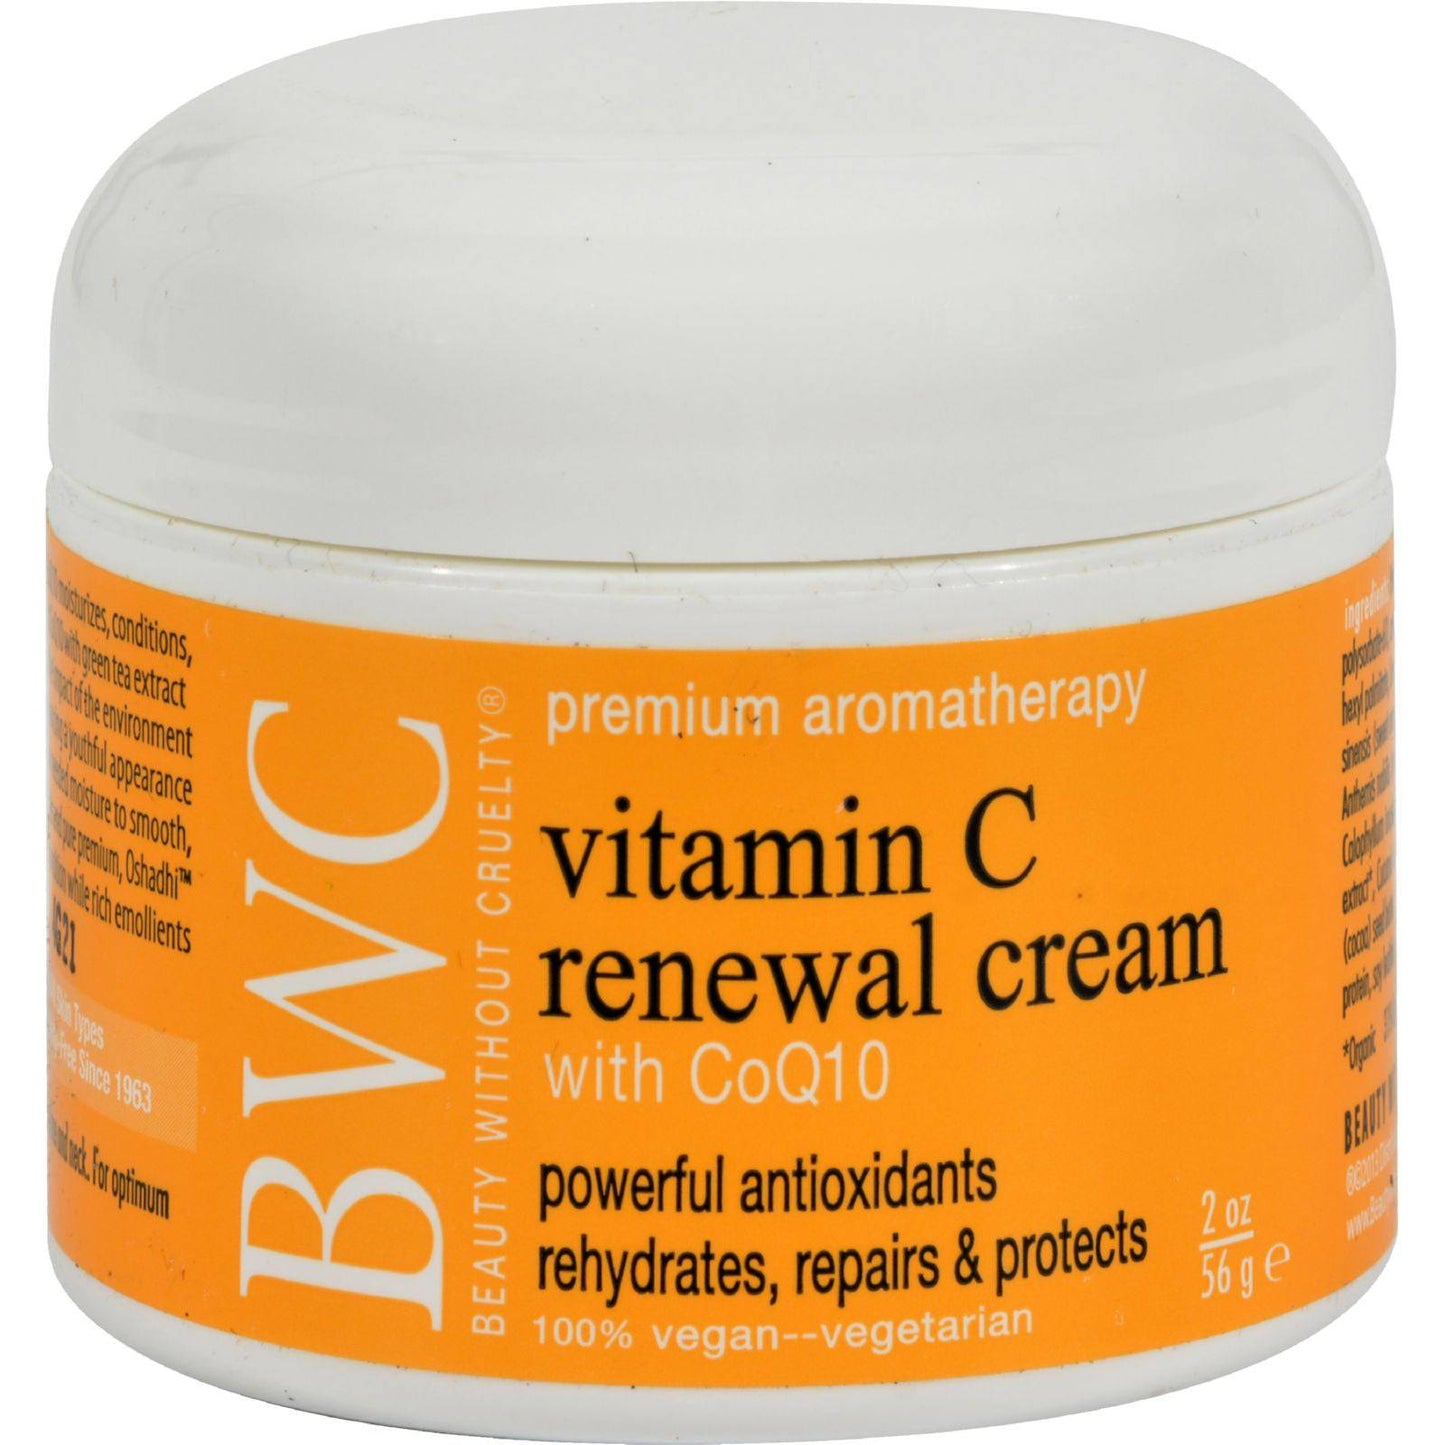 Buy Beauty Without Cruelty Renewal Cream Vitamin C With Coq10 - 2 Oz  at OnlyNaturals.us